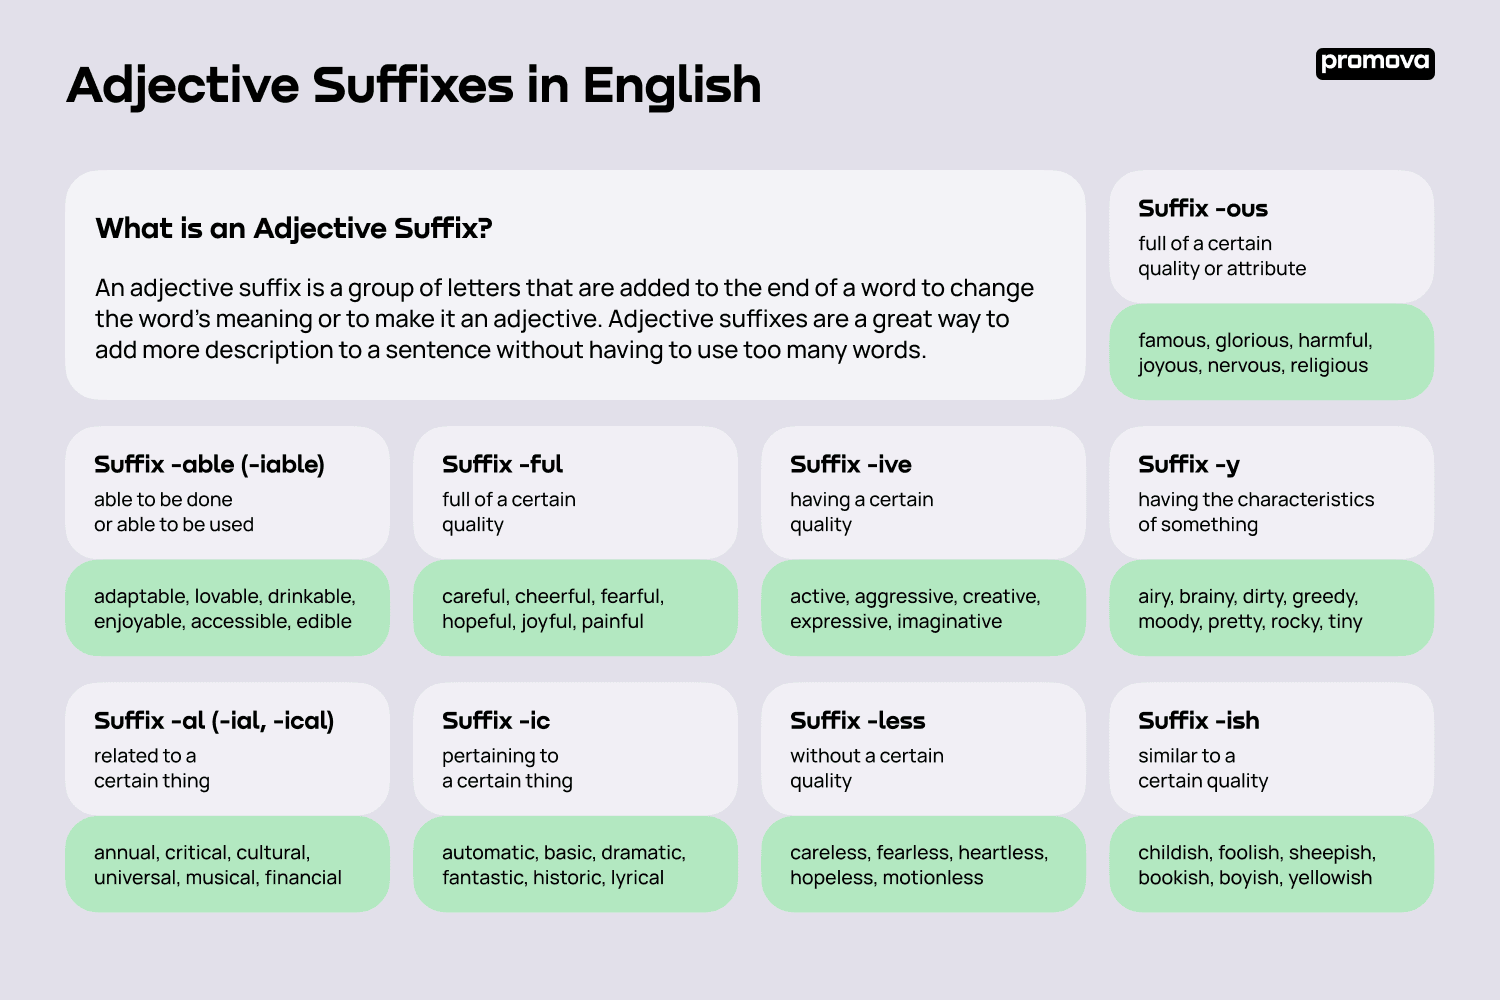 Adjective Suffixes in English